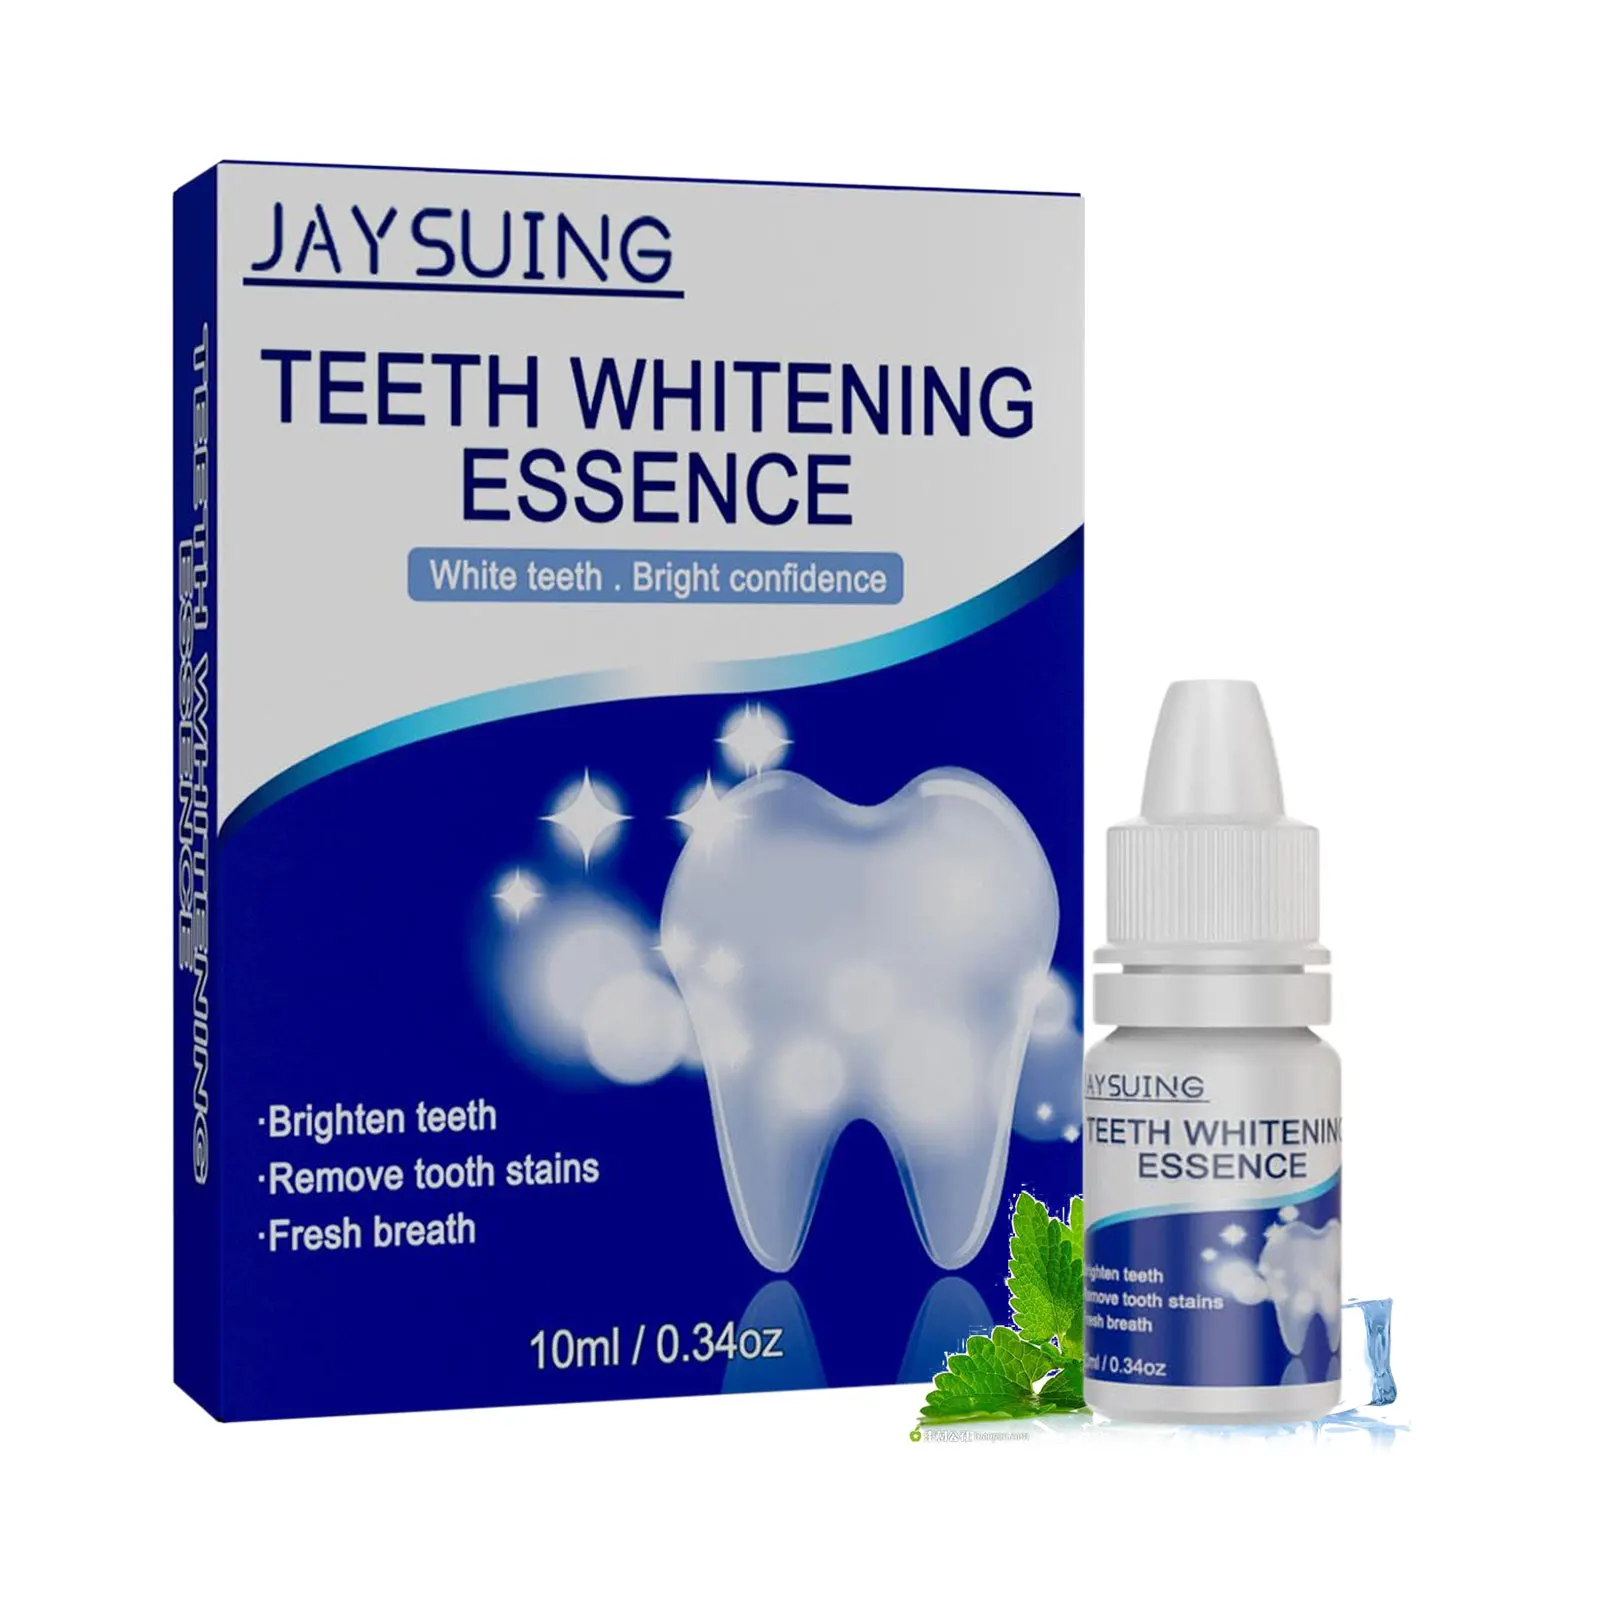 

Teeth Whitening Serum Dental Whitener Bleach Serum With Cotton Swabs Tooth Serum Removes Plaque Stains Dentistry Bleaching Care